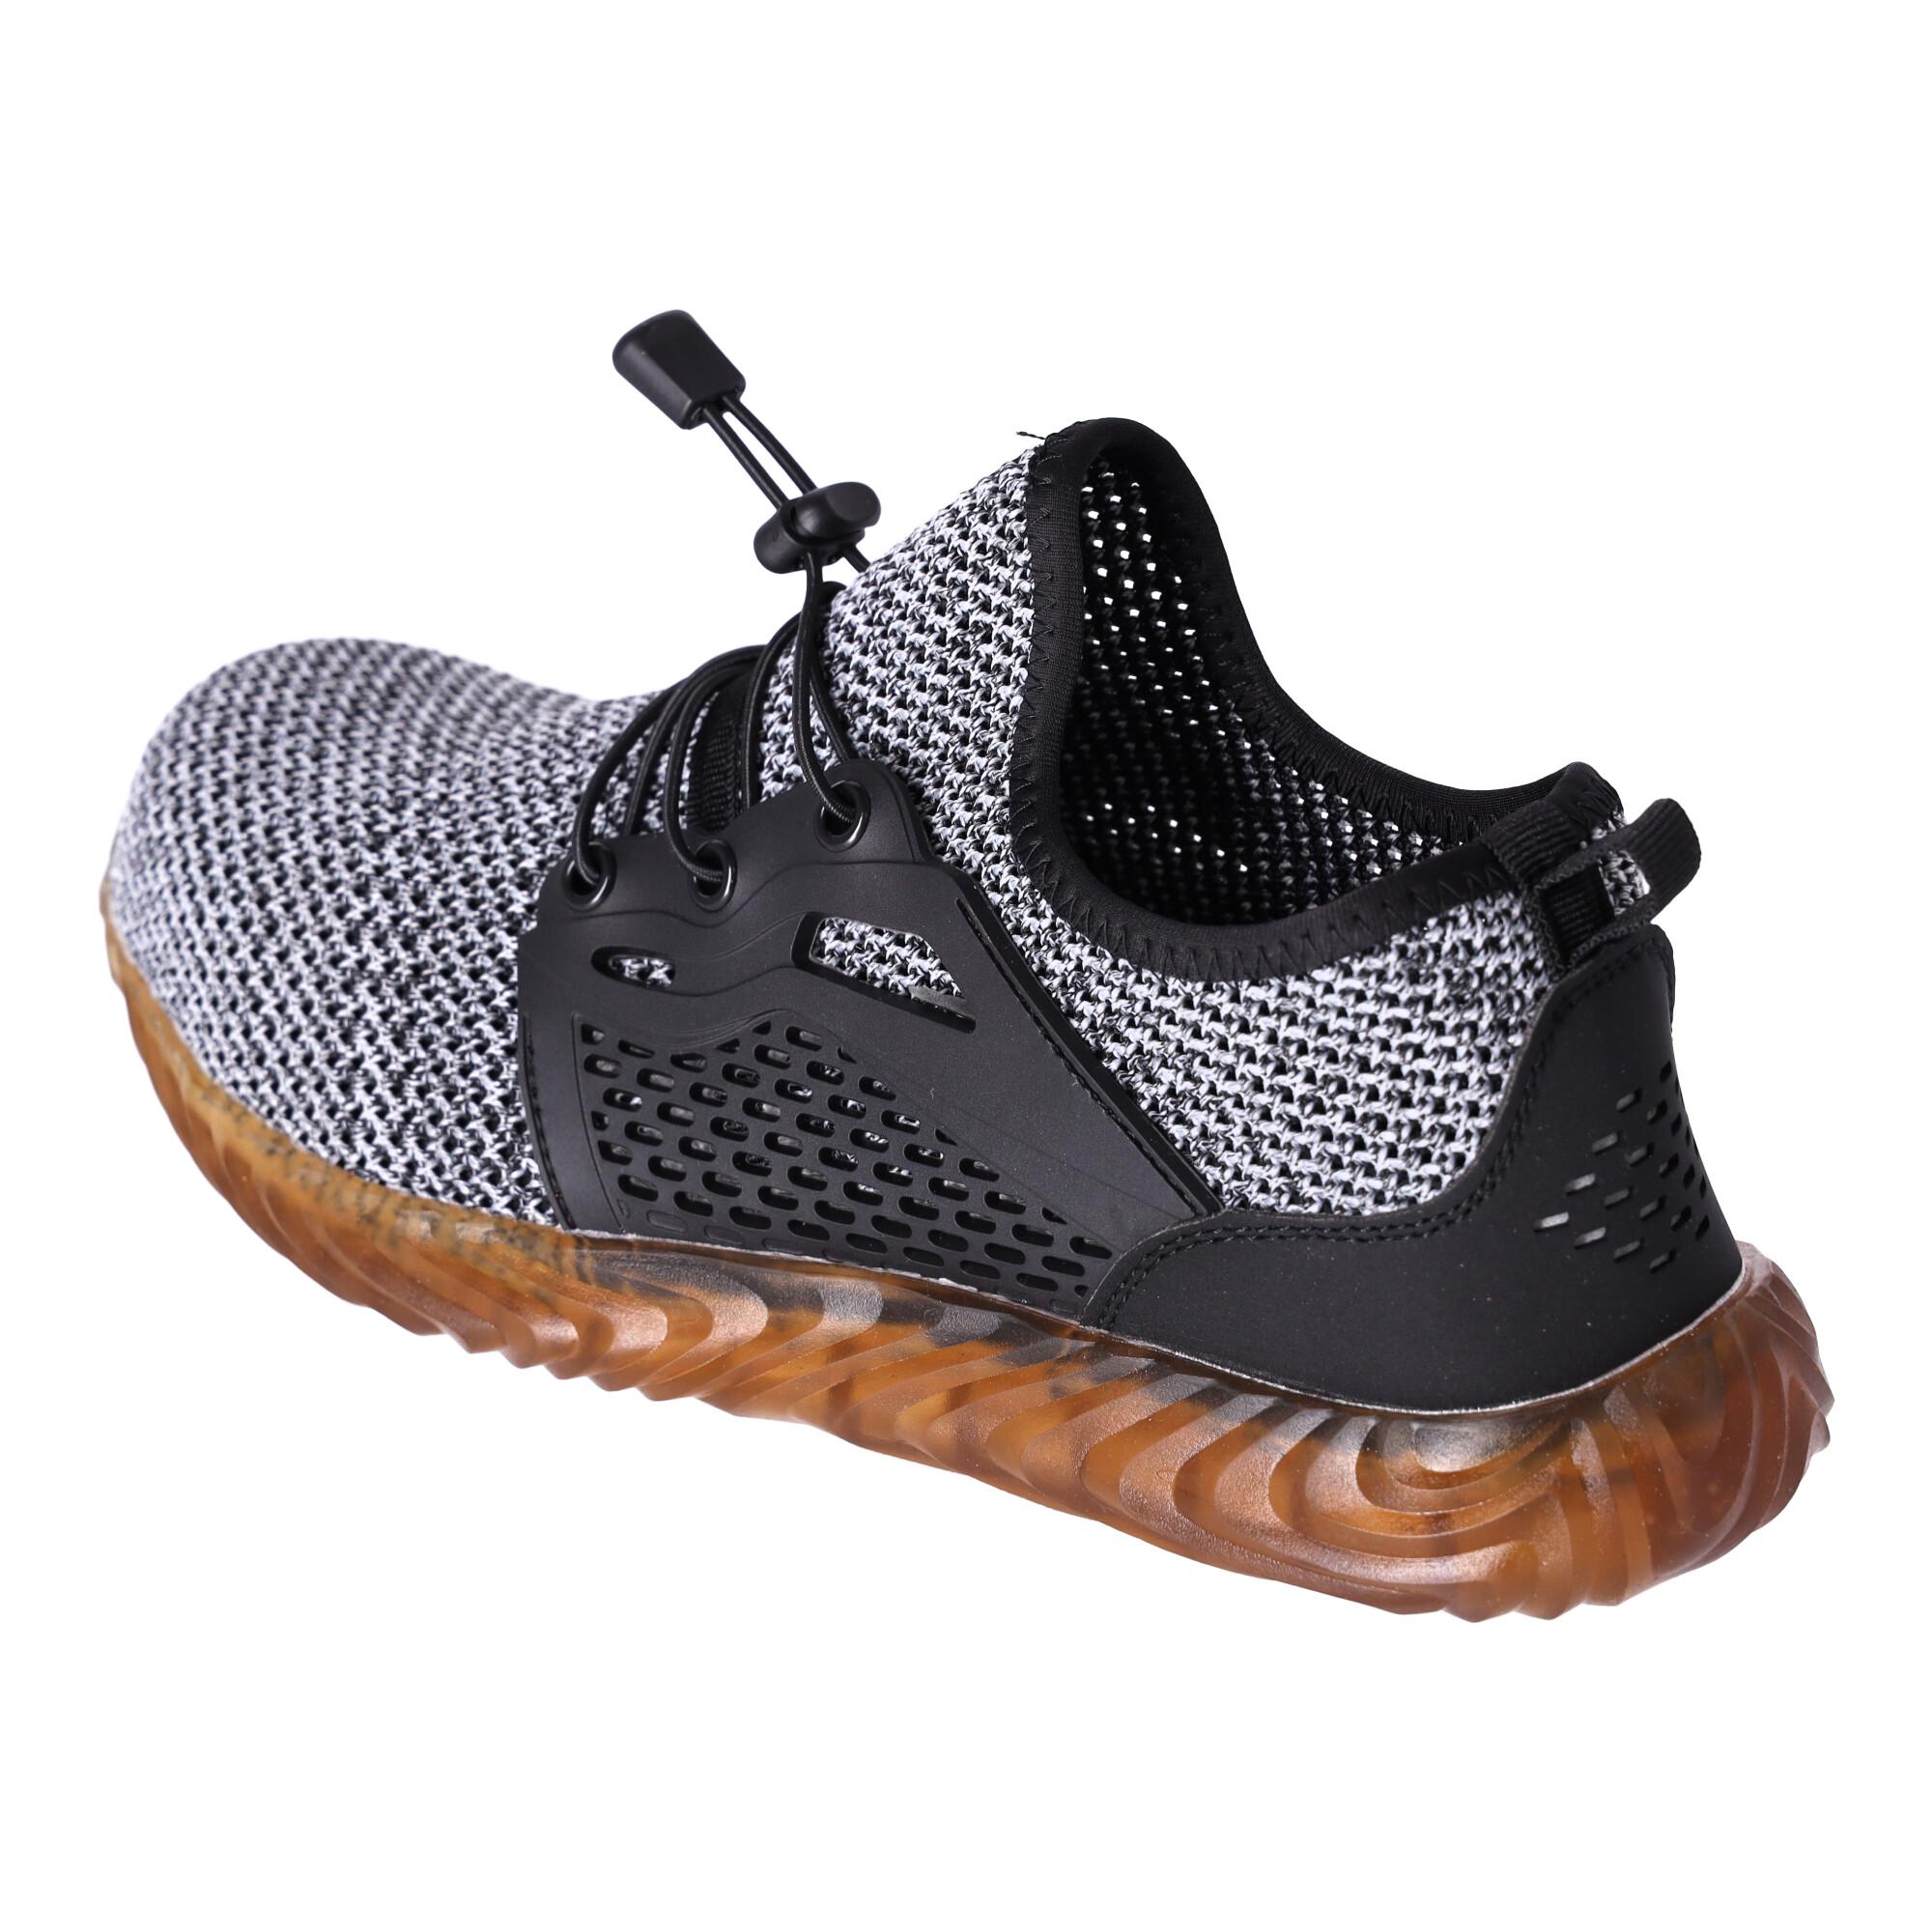 Work safety shoes Soft "45" - gray